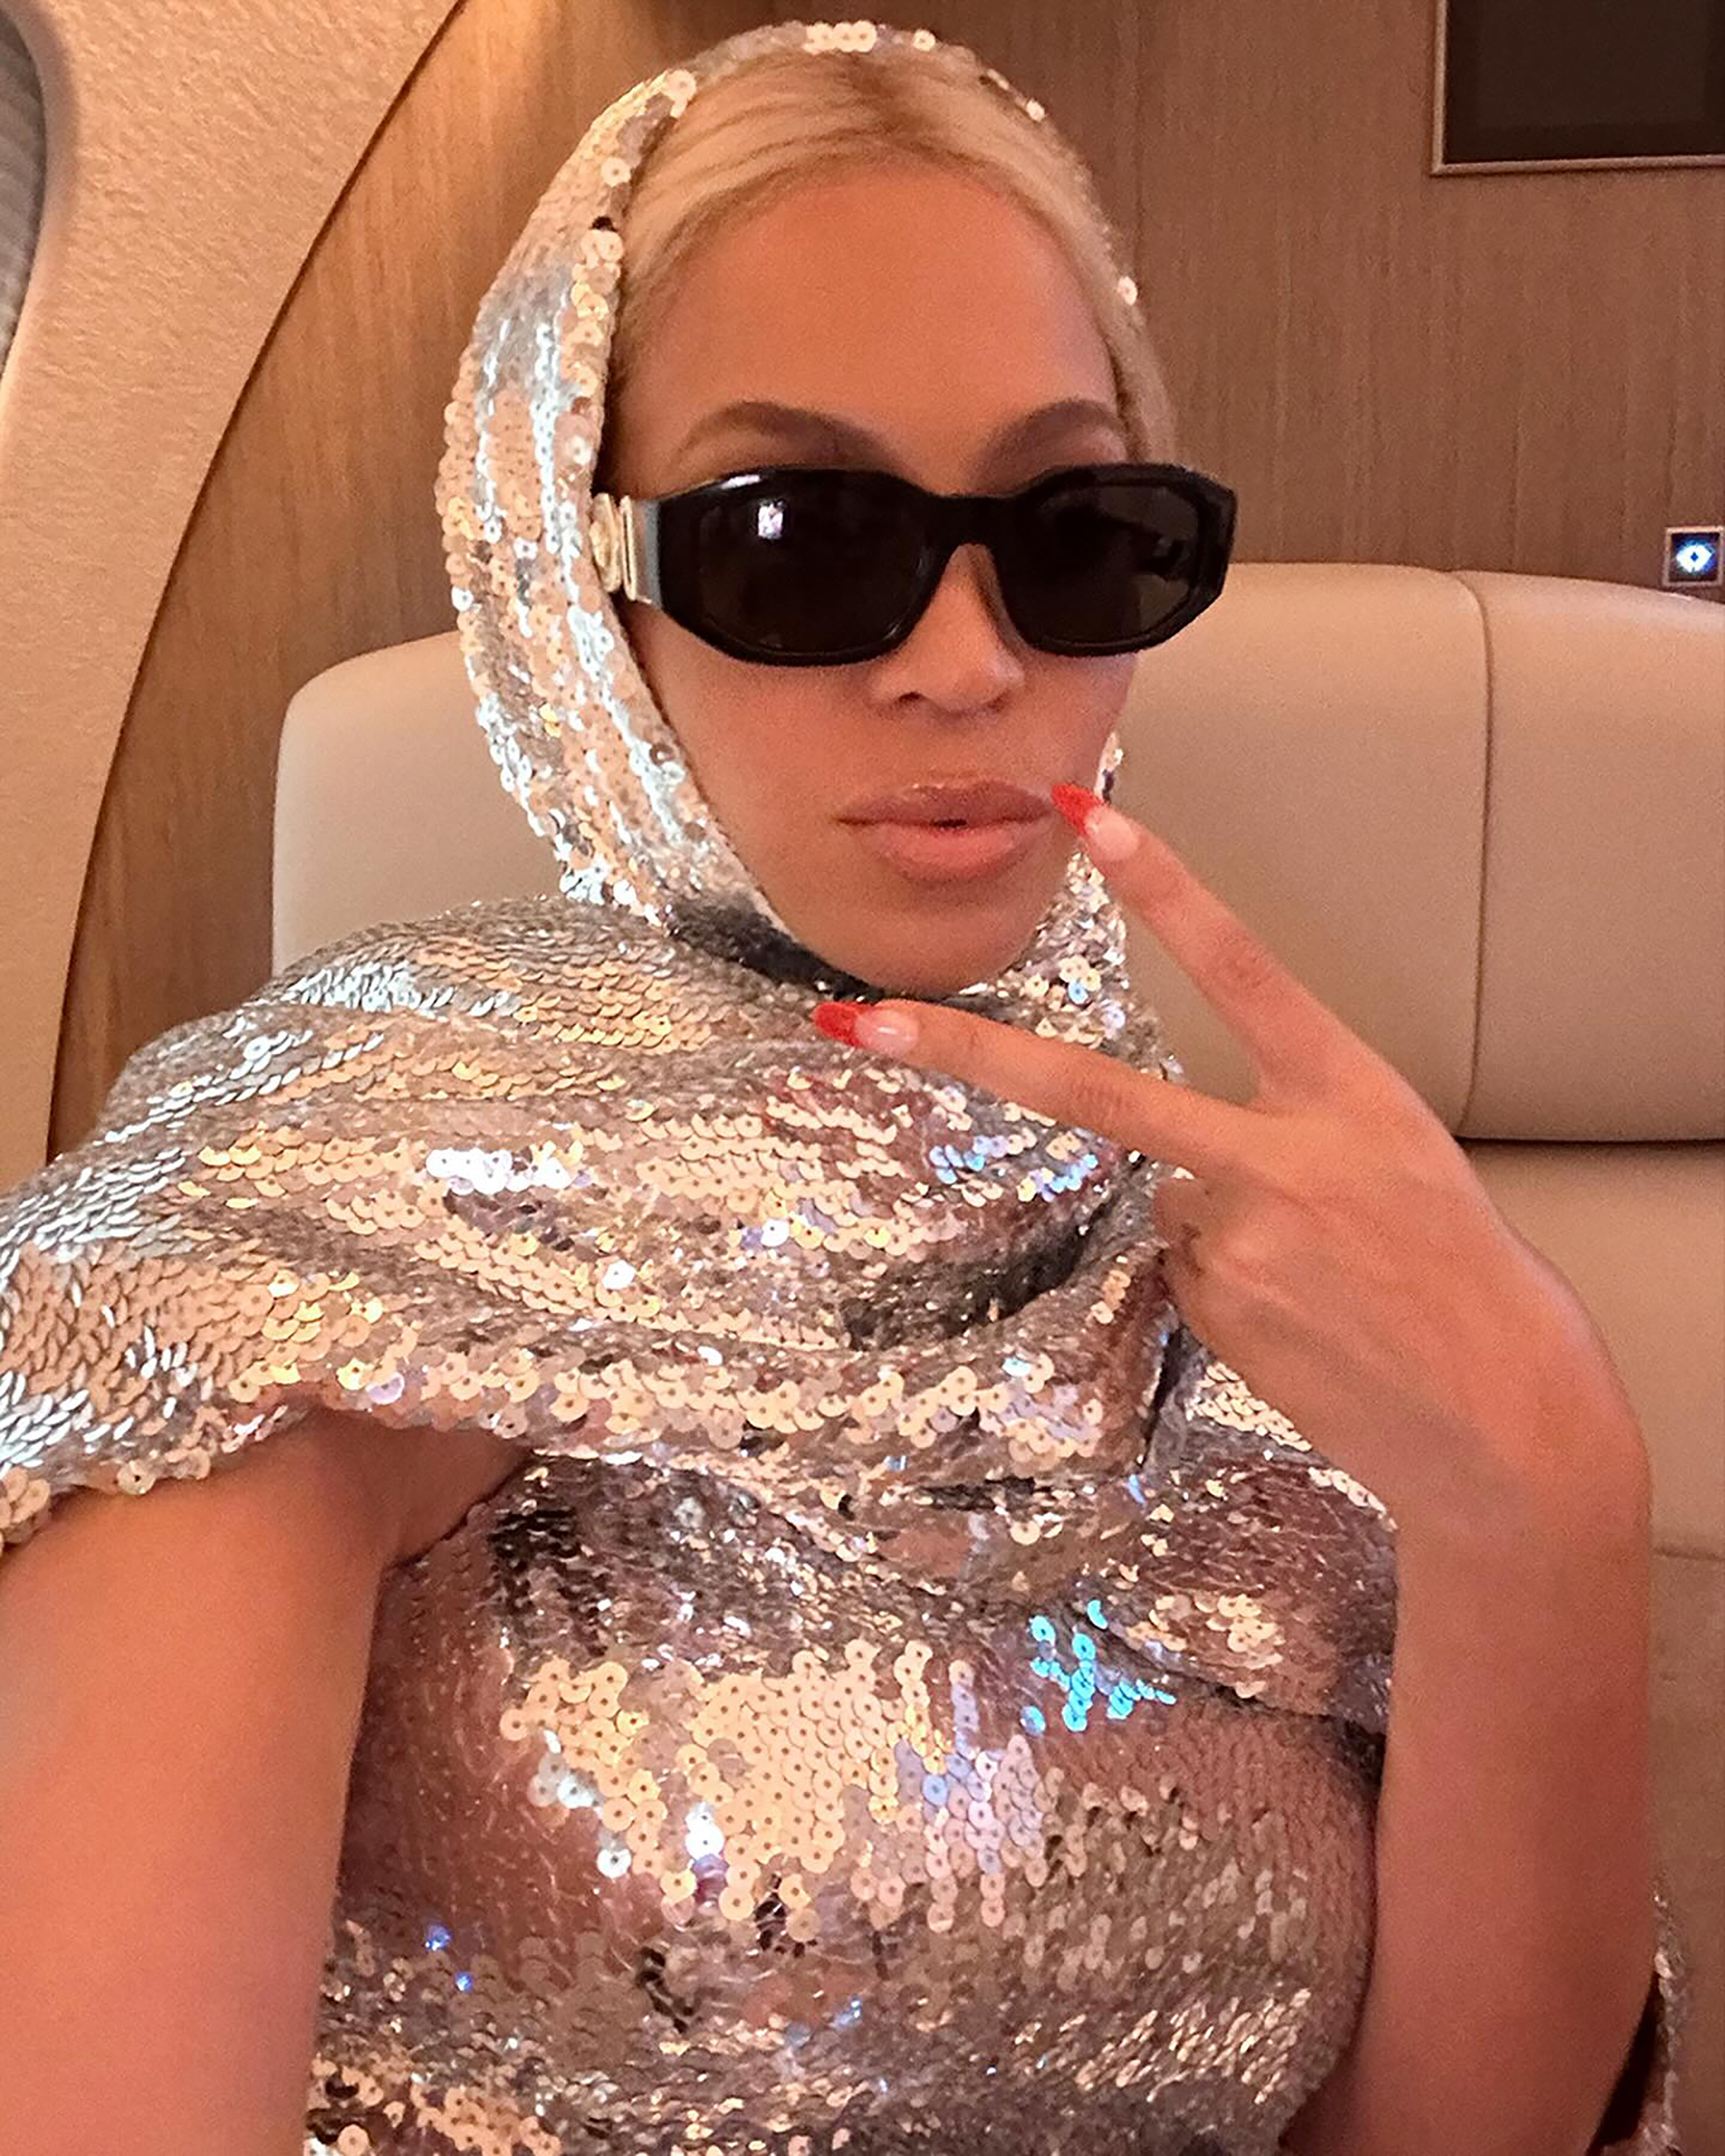 Beyonce also posed for a selfie on her private jet